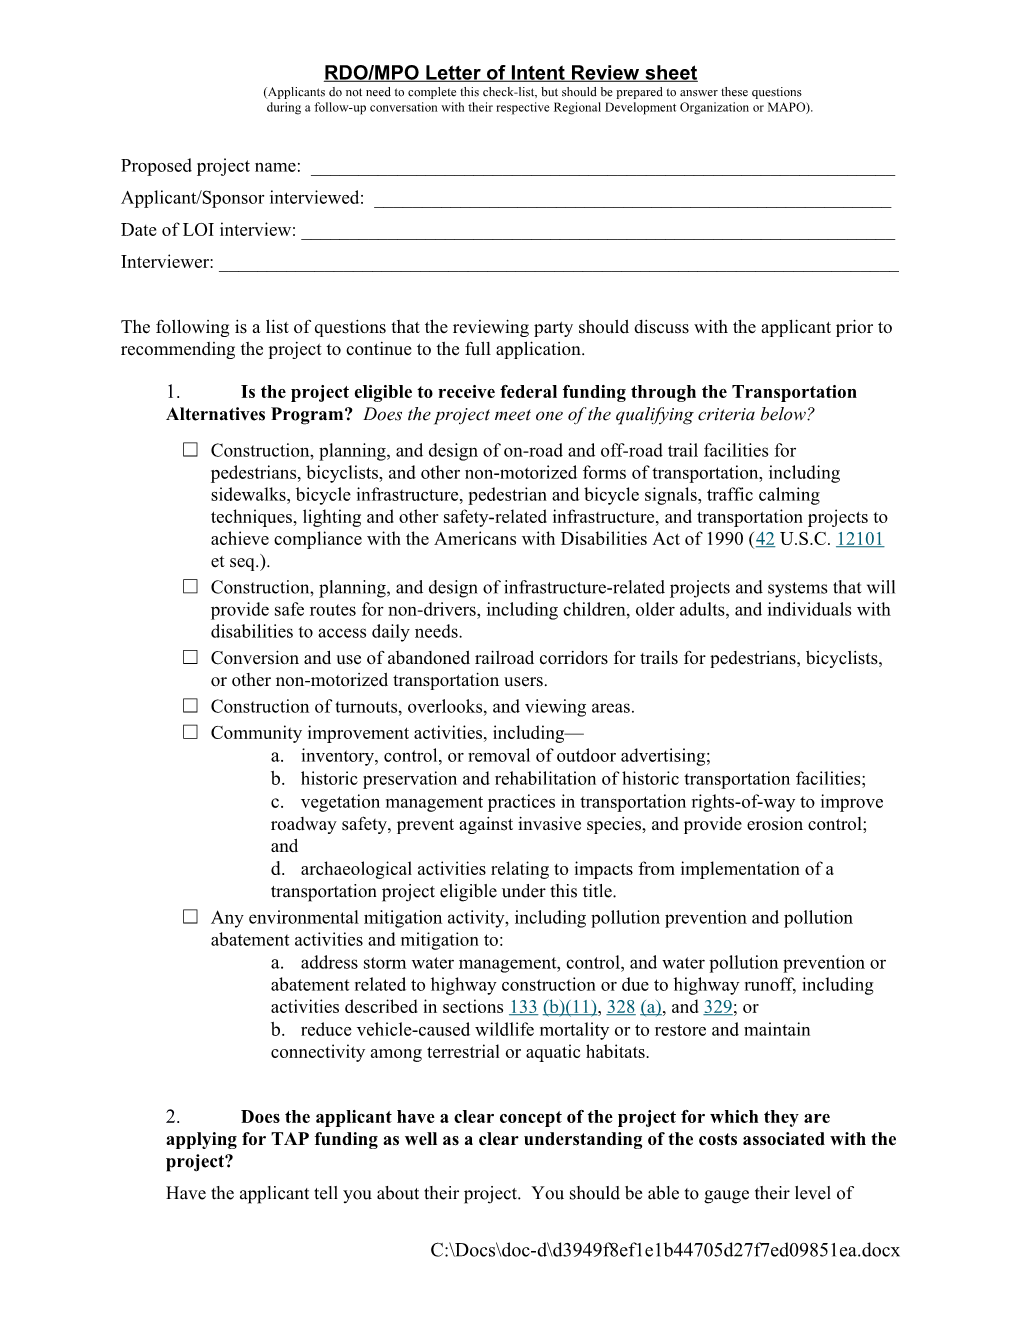 RDO/Mpoletter of Intent Review Sheet